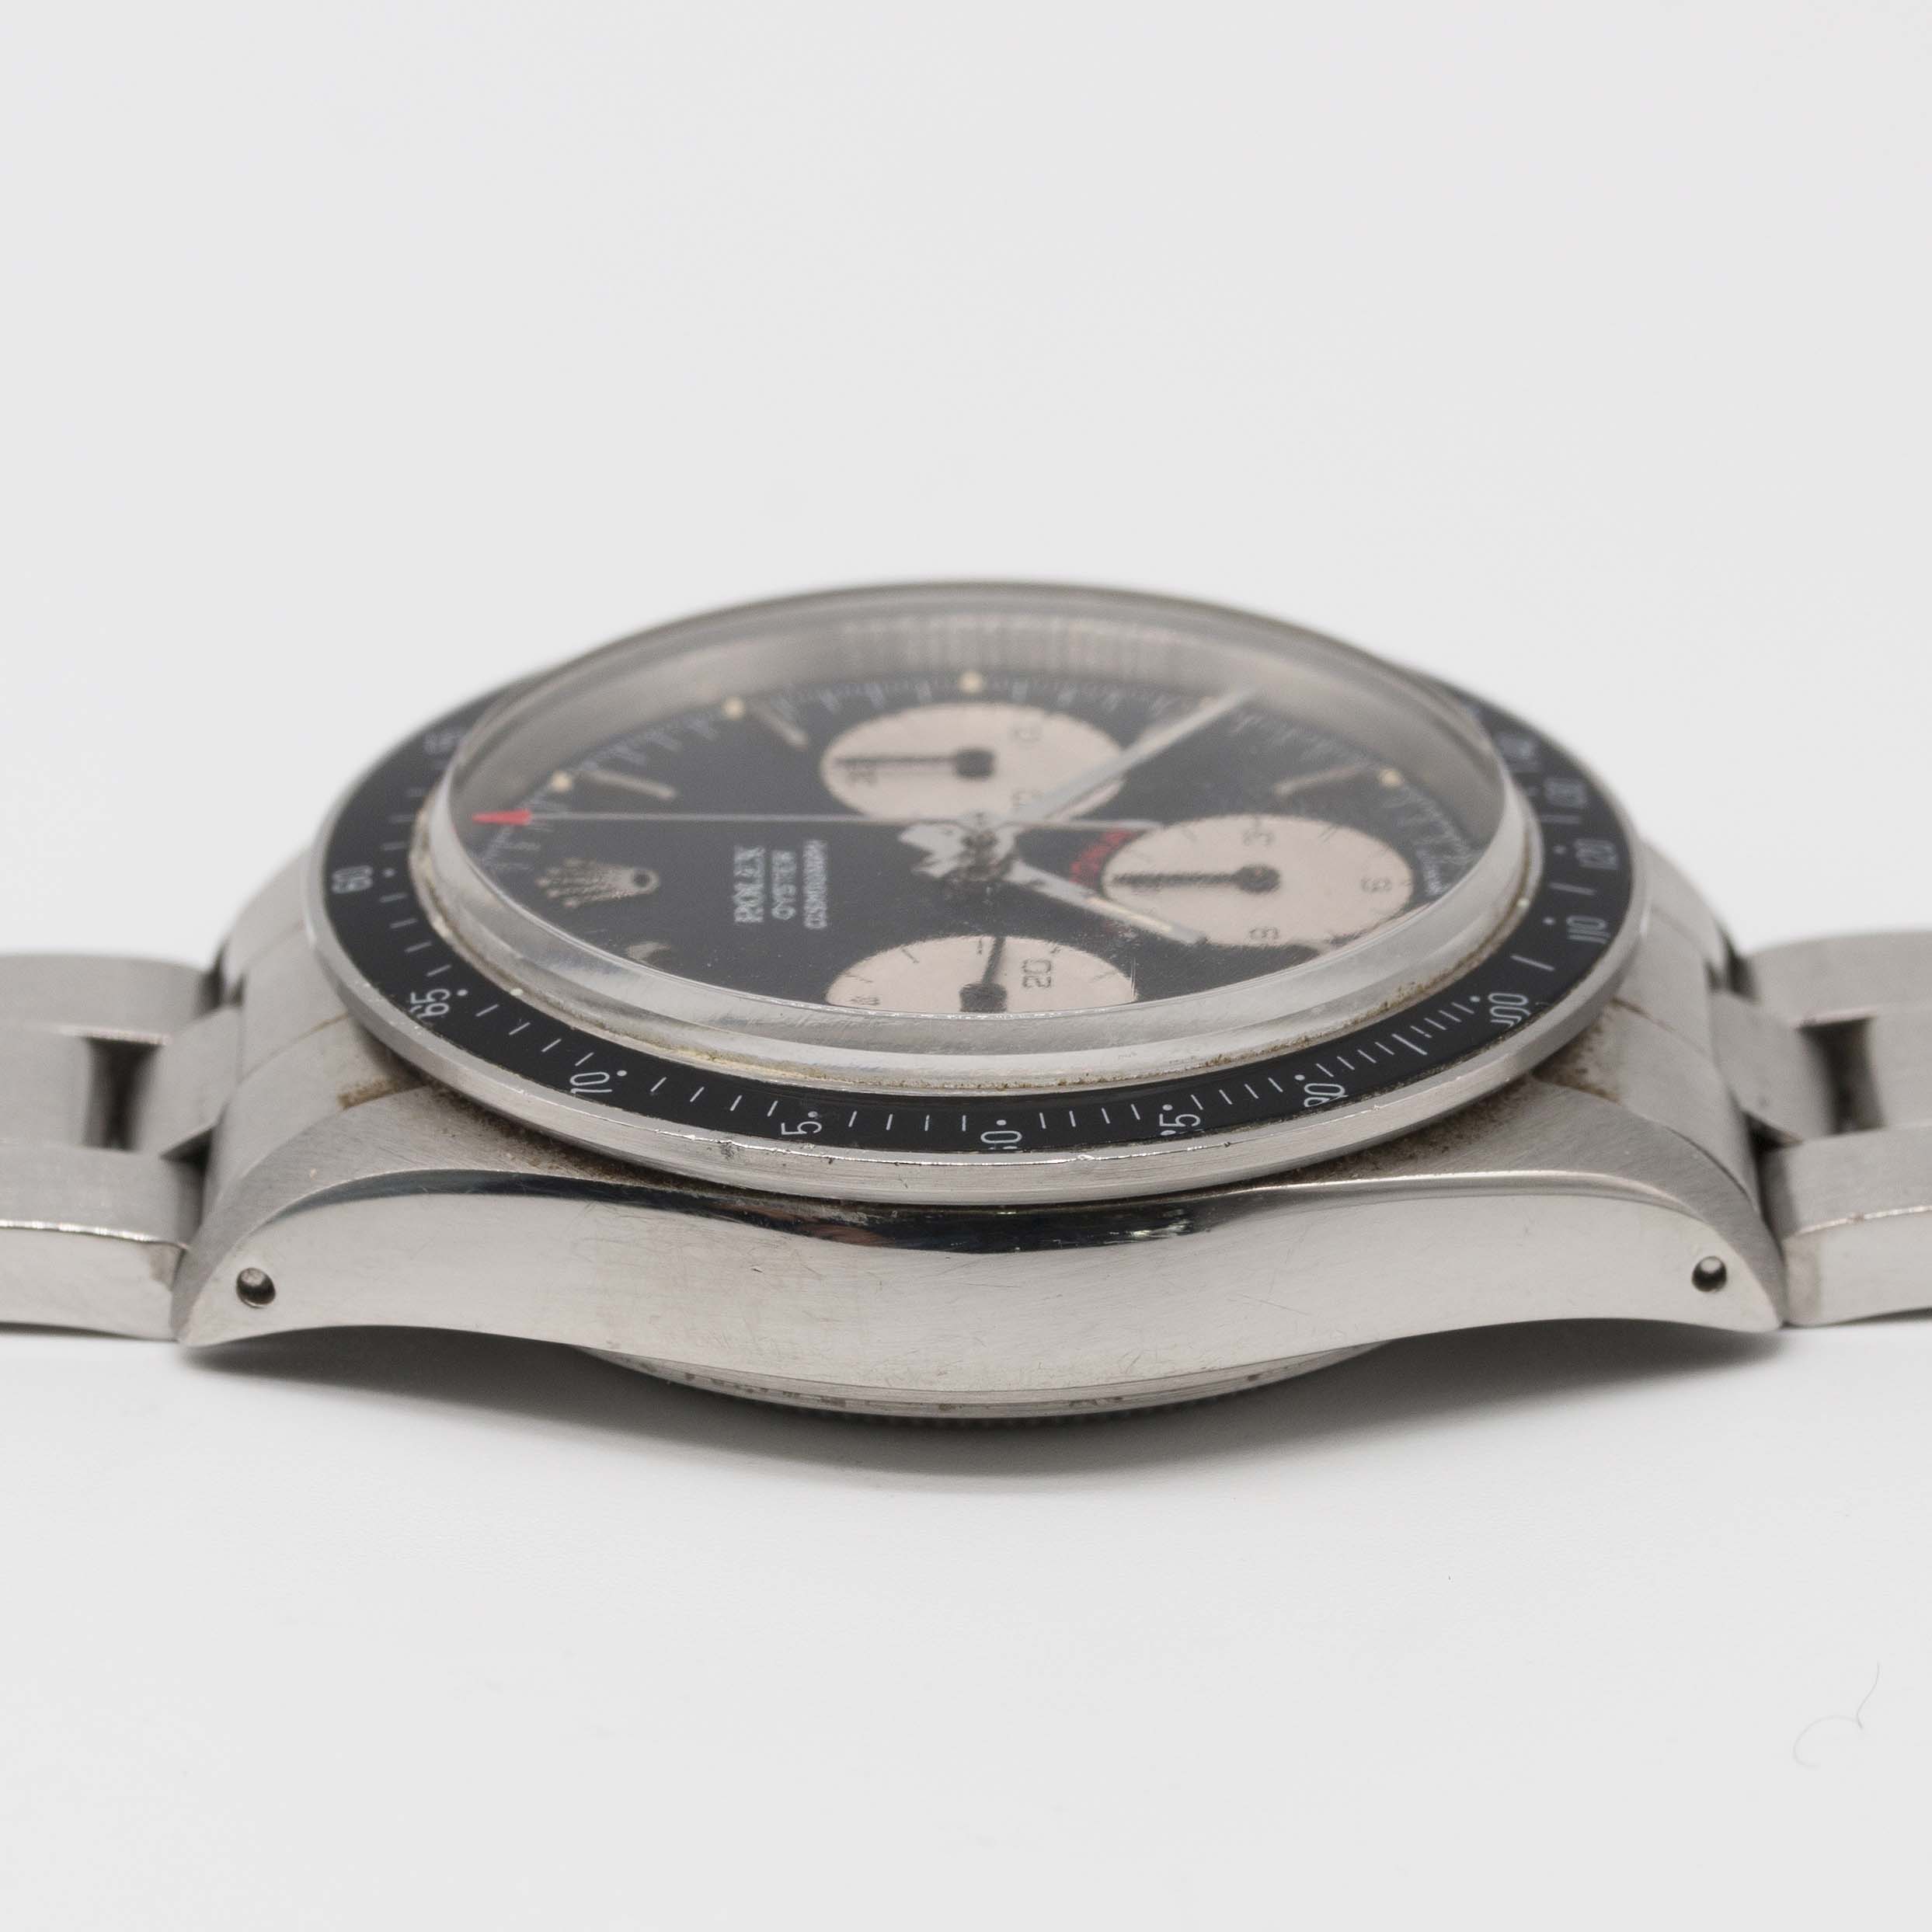 A VERY RARE GENTLEMAN'S STAINLESS STEEL ROLEX OYSTER COSMOGRAPH DAYTONA BRACELET WATCH CIRCA 1979, - Image 12 of 12